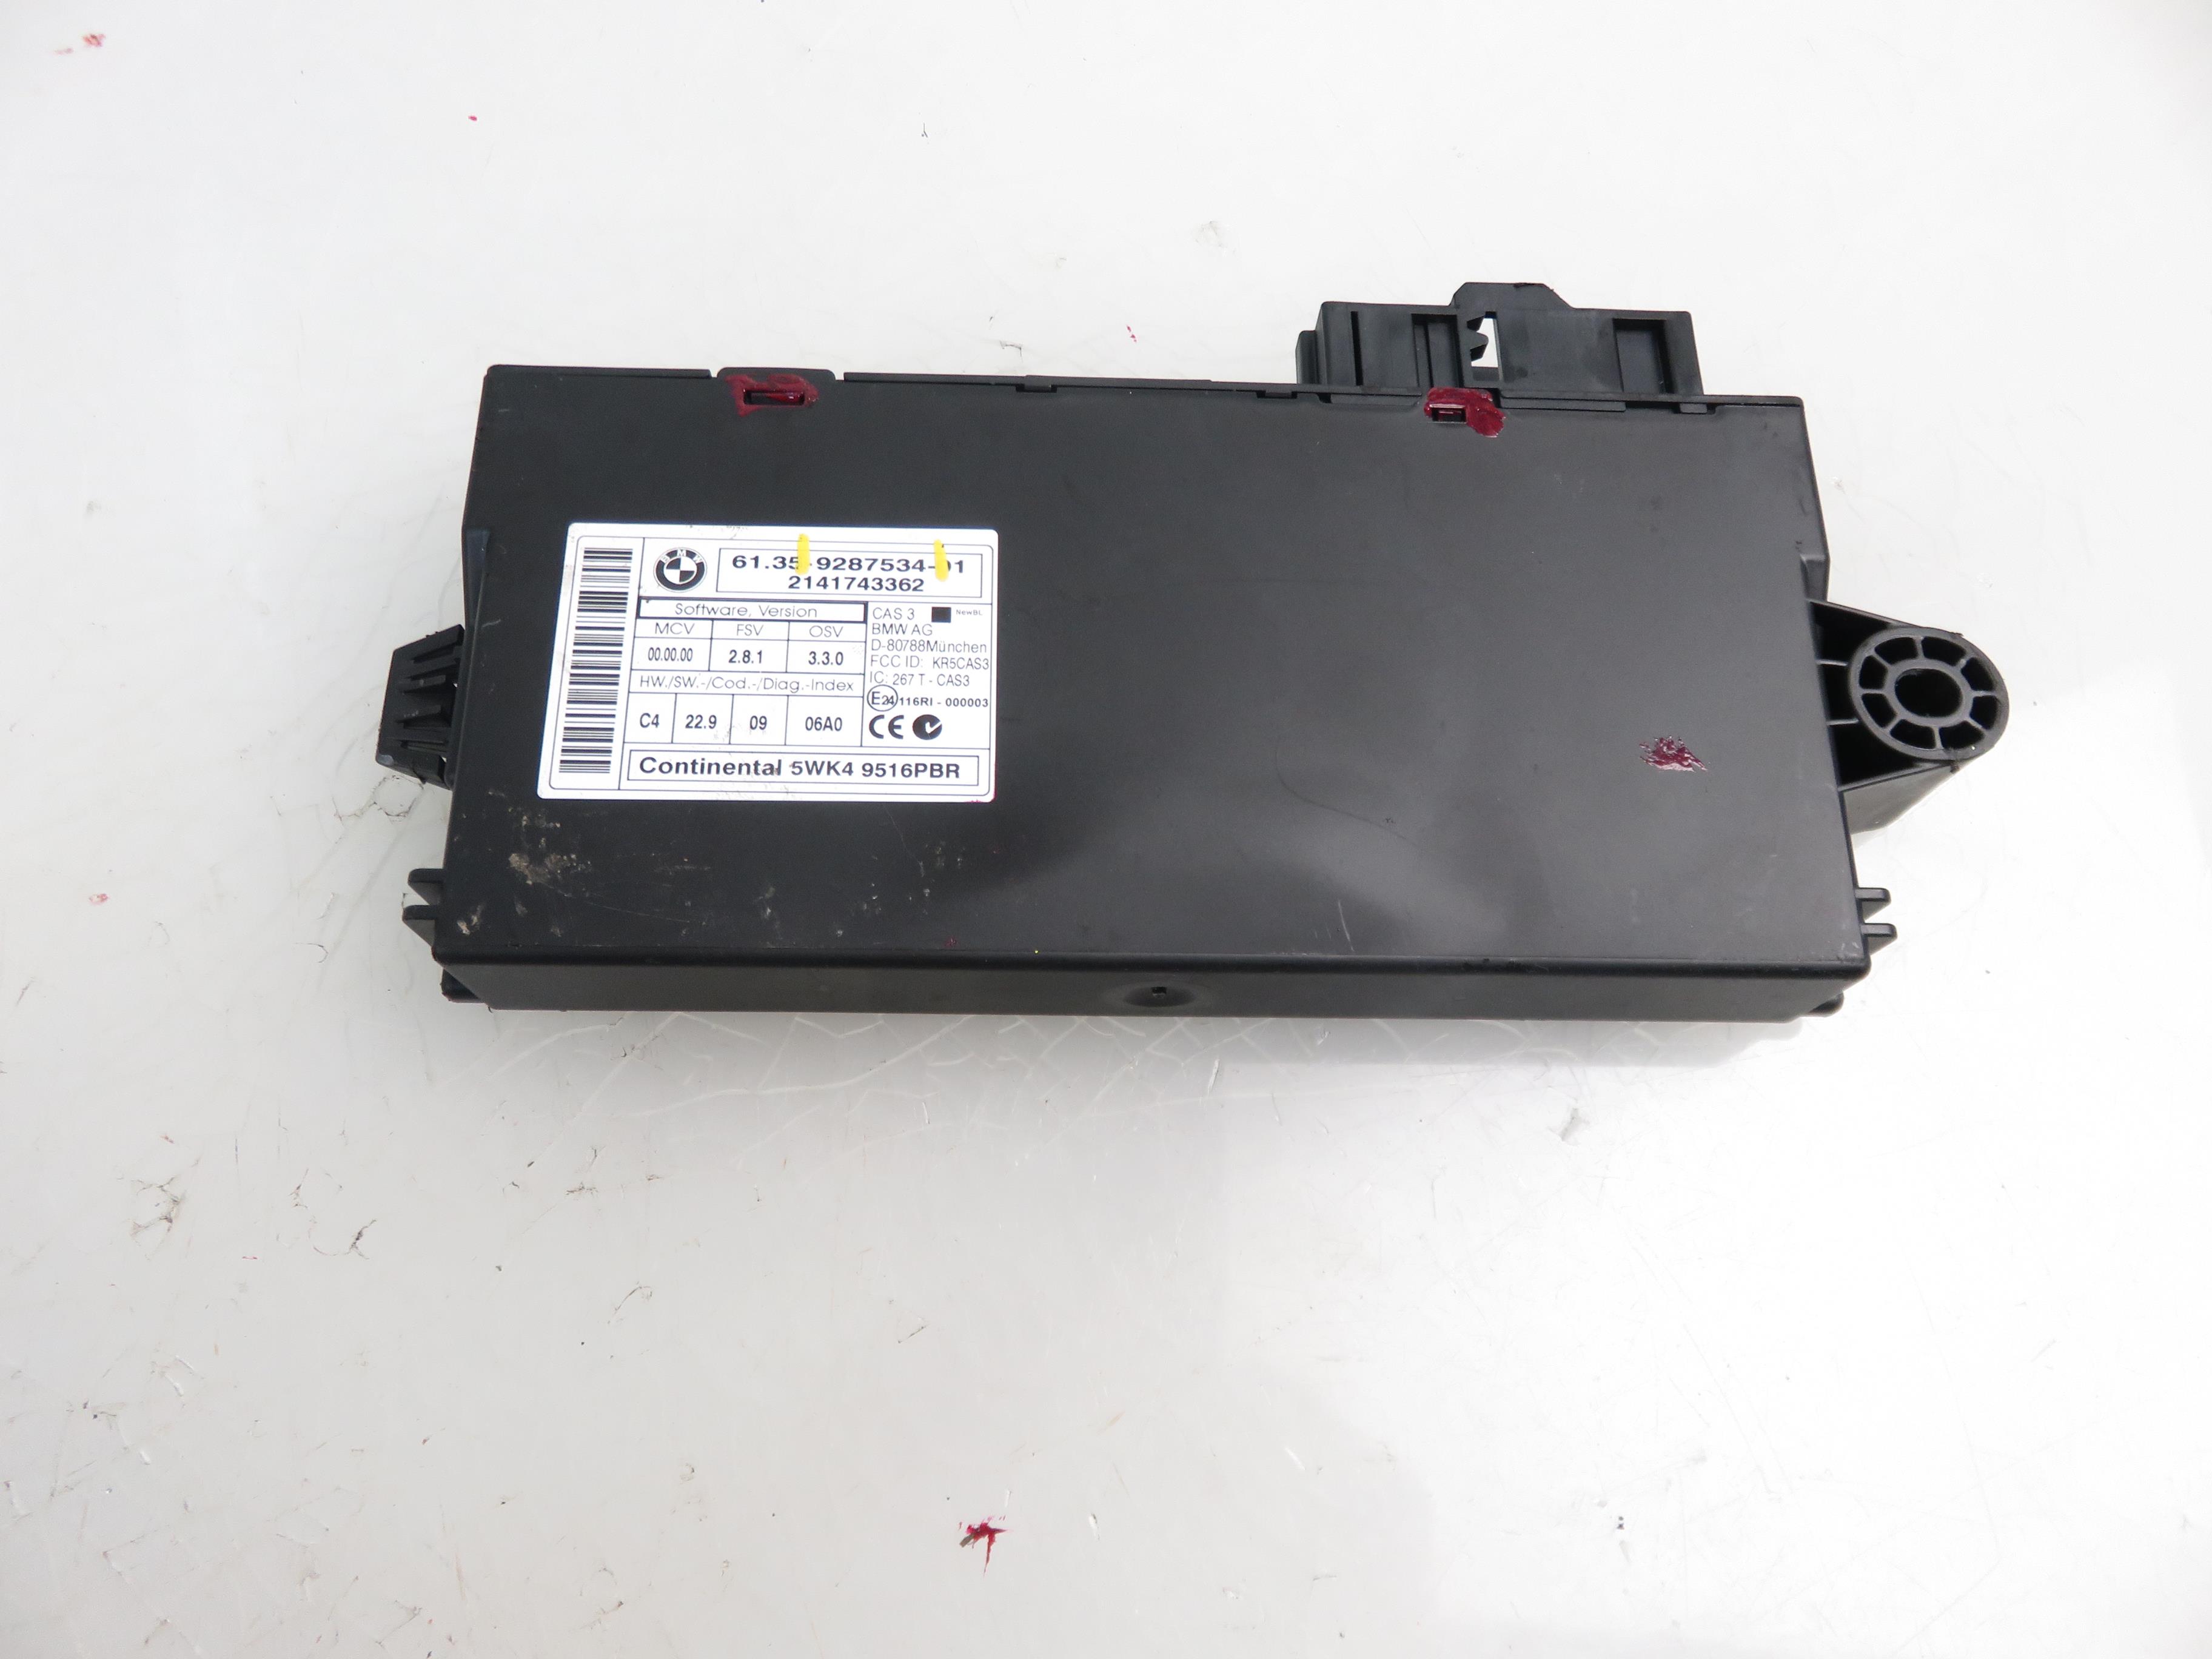 BMW X1 E84 (2009-2015) Other Control Units 9287534 21929664